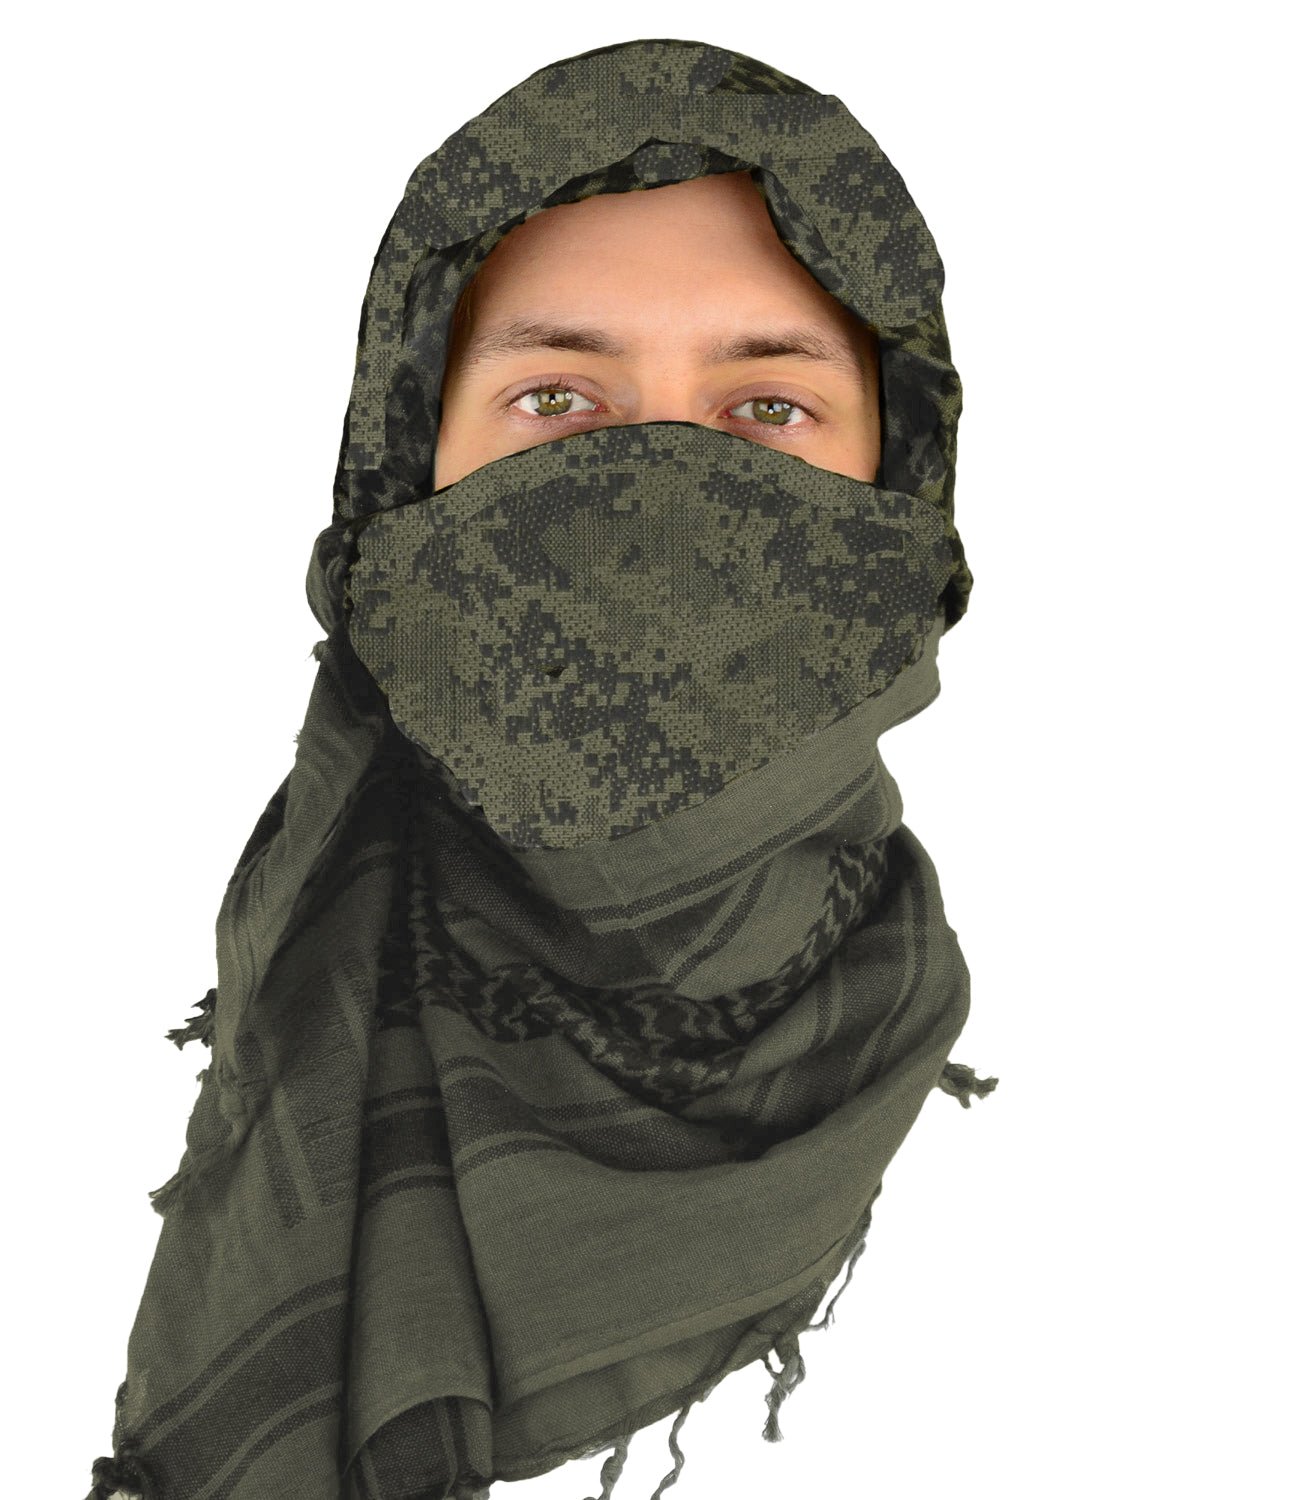 Low price & fast shipping15 Ways to Wear a Keffiyeh & Shemagh (PHOTOS ...